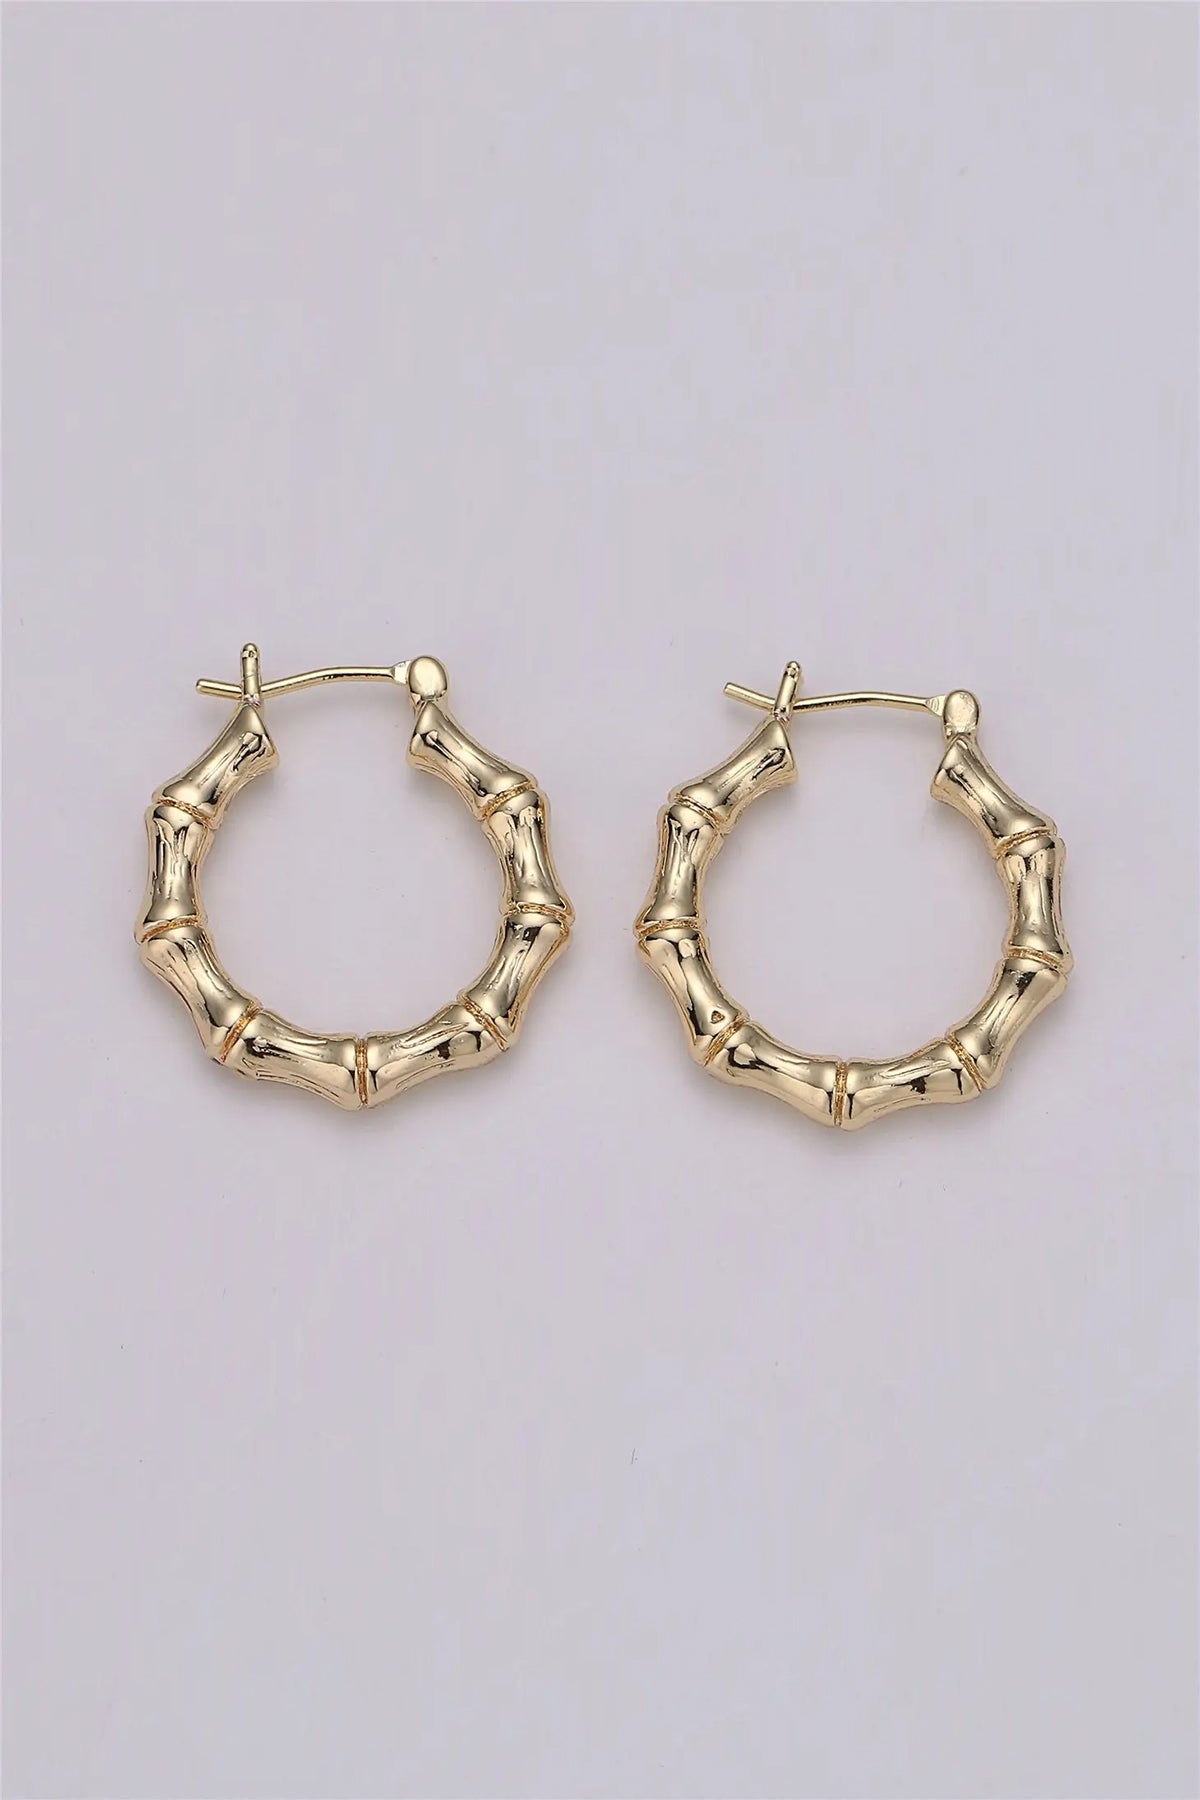 Women' Business Bamboo Earrings - Gold NORA GARDNER | OFFICIAL STORE for work and office